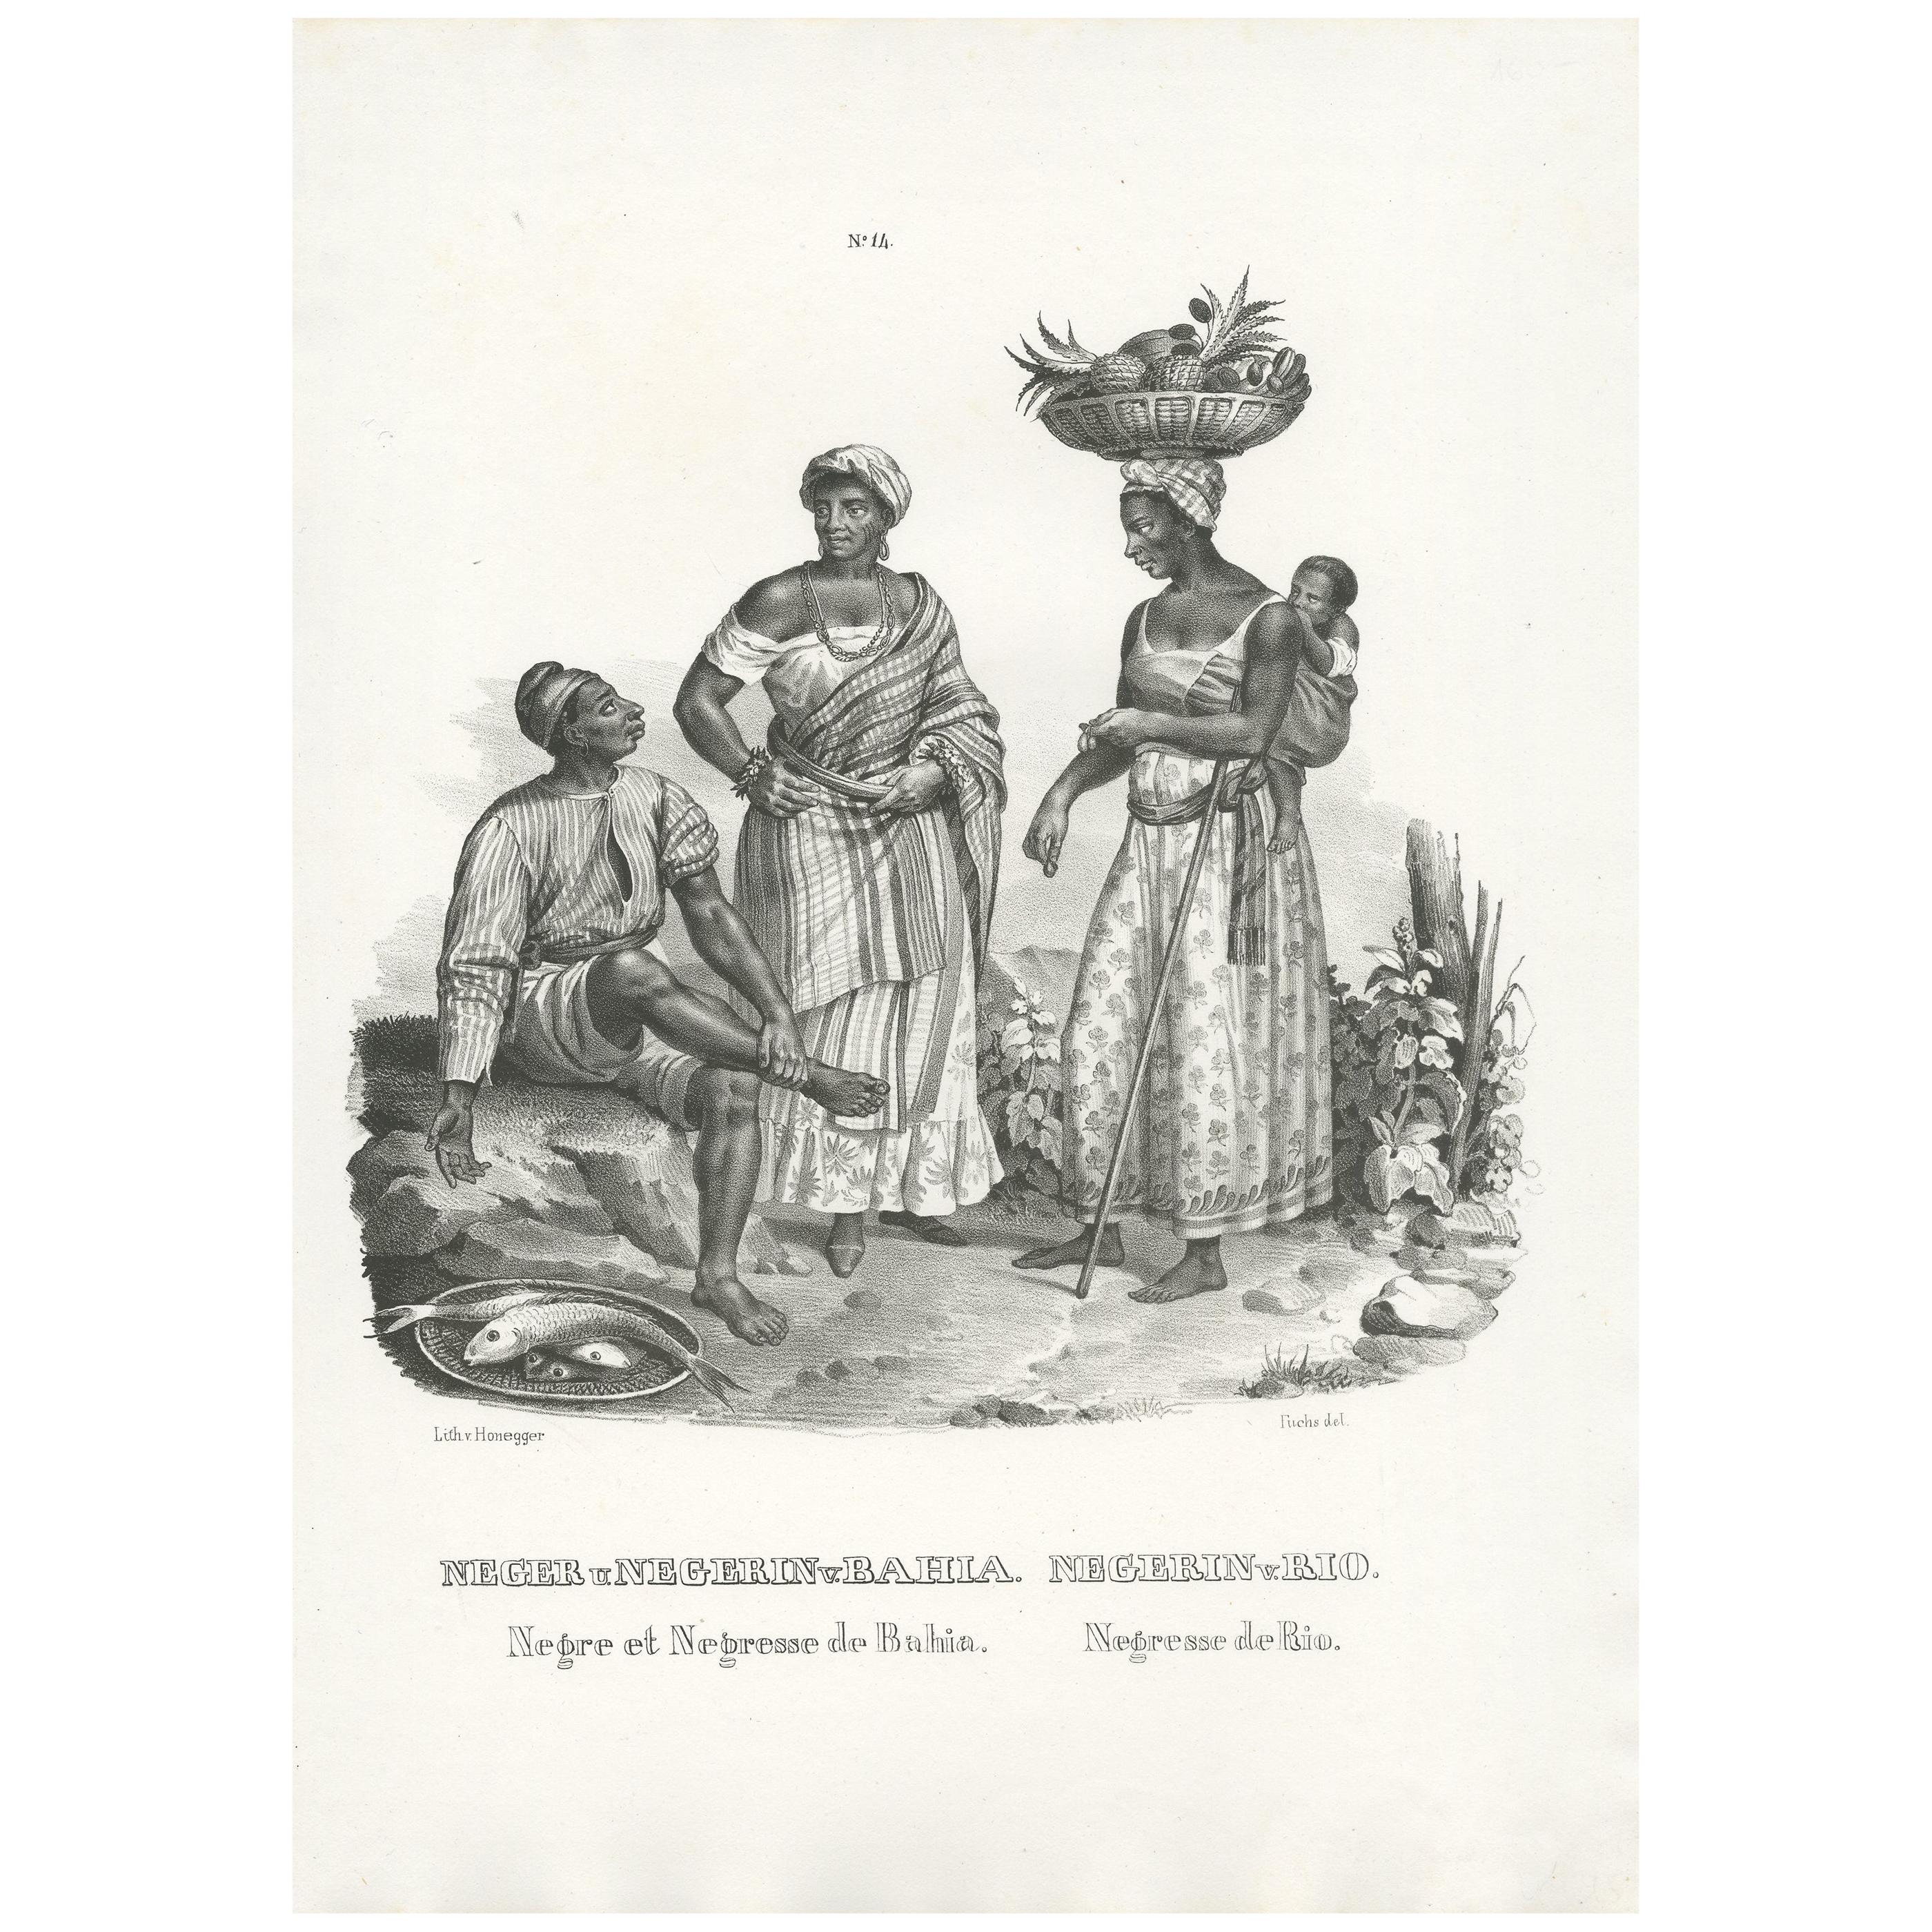 Antique Print of Natives of Bahia and Rio by Honegger (1845)